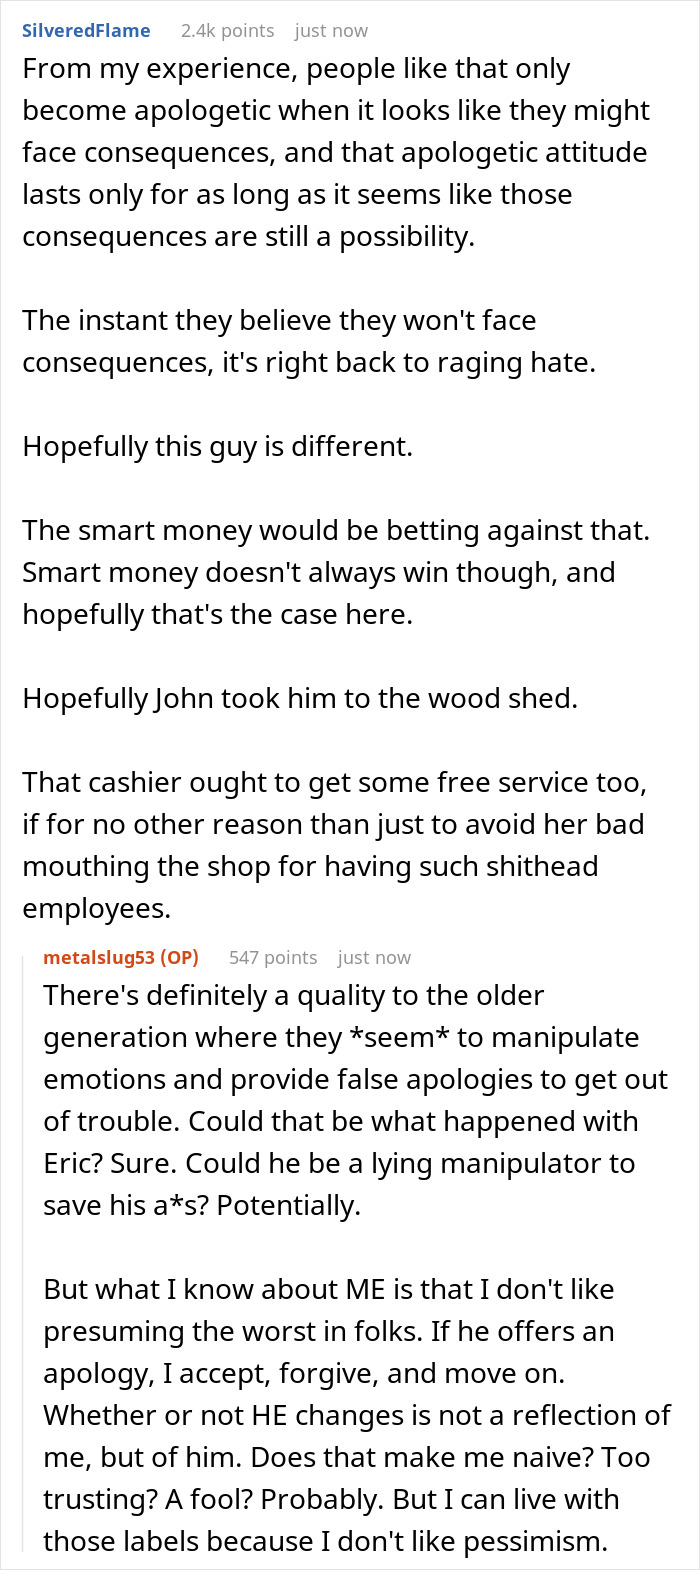 Boomer Thinks He Can Disrespect Cashier, Passerby Decides To Meet Him At His Job For A Lesson